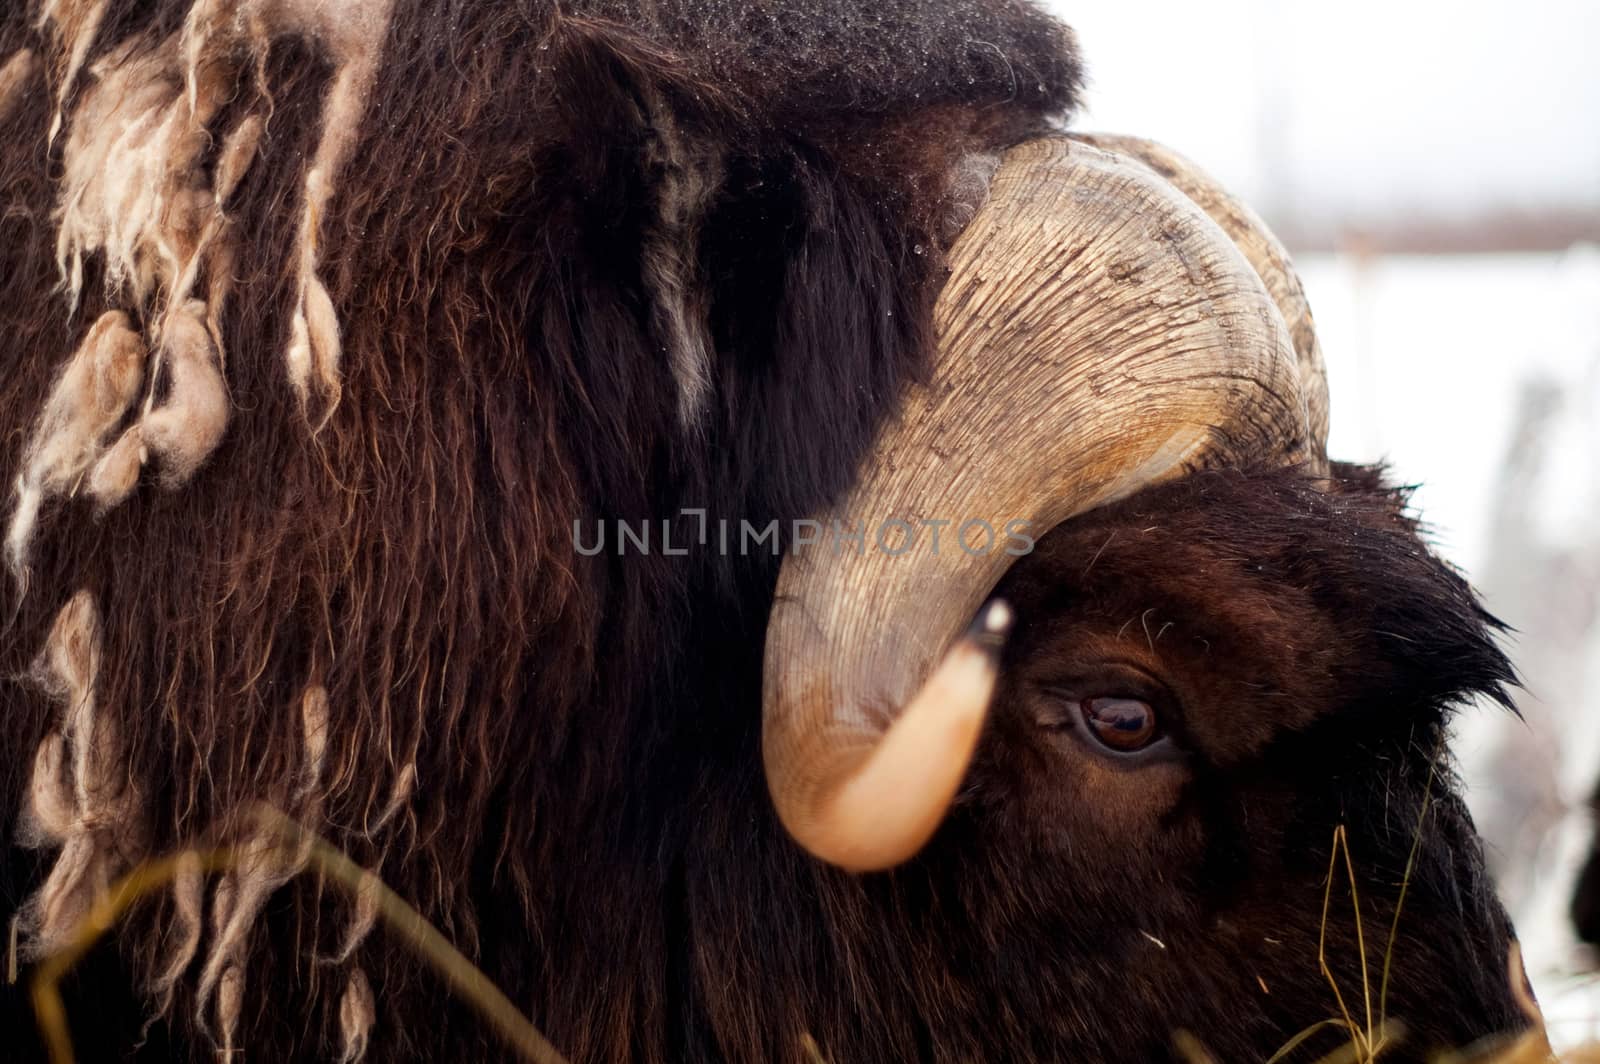 Portrait of the Musk Ox